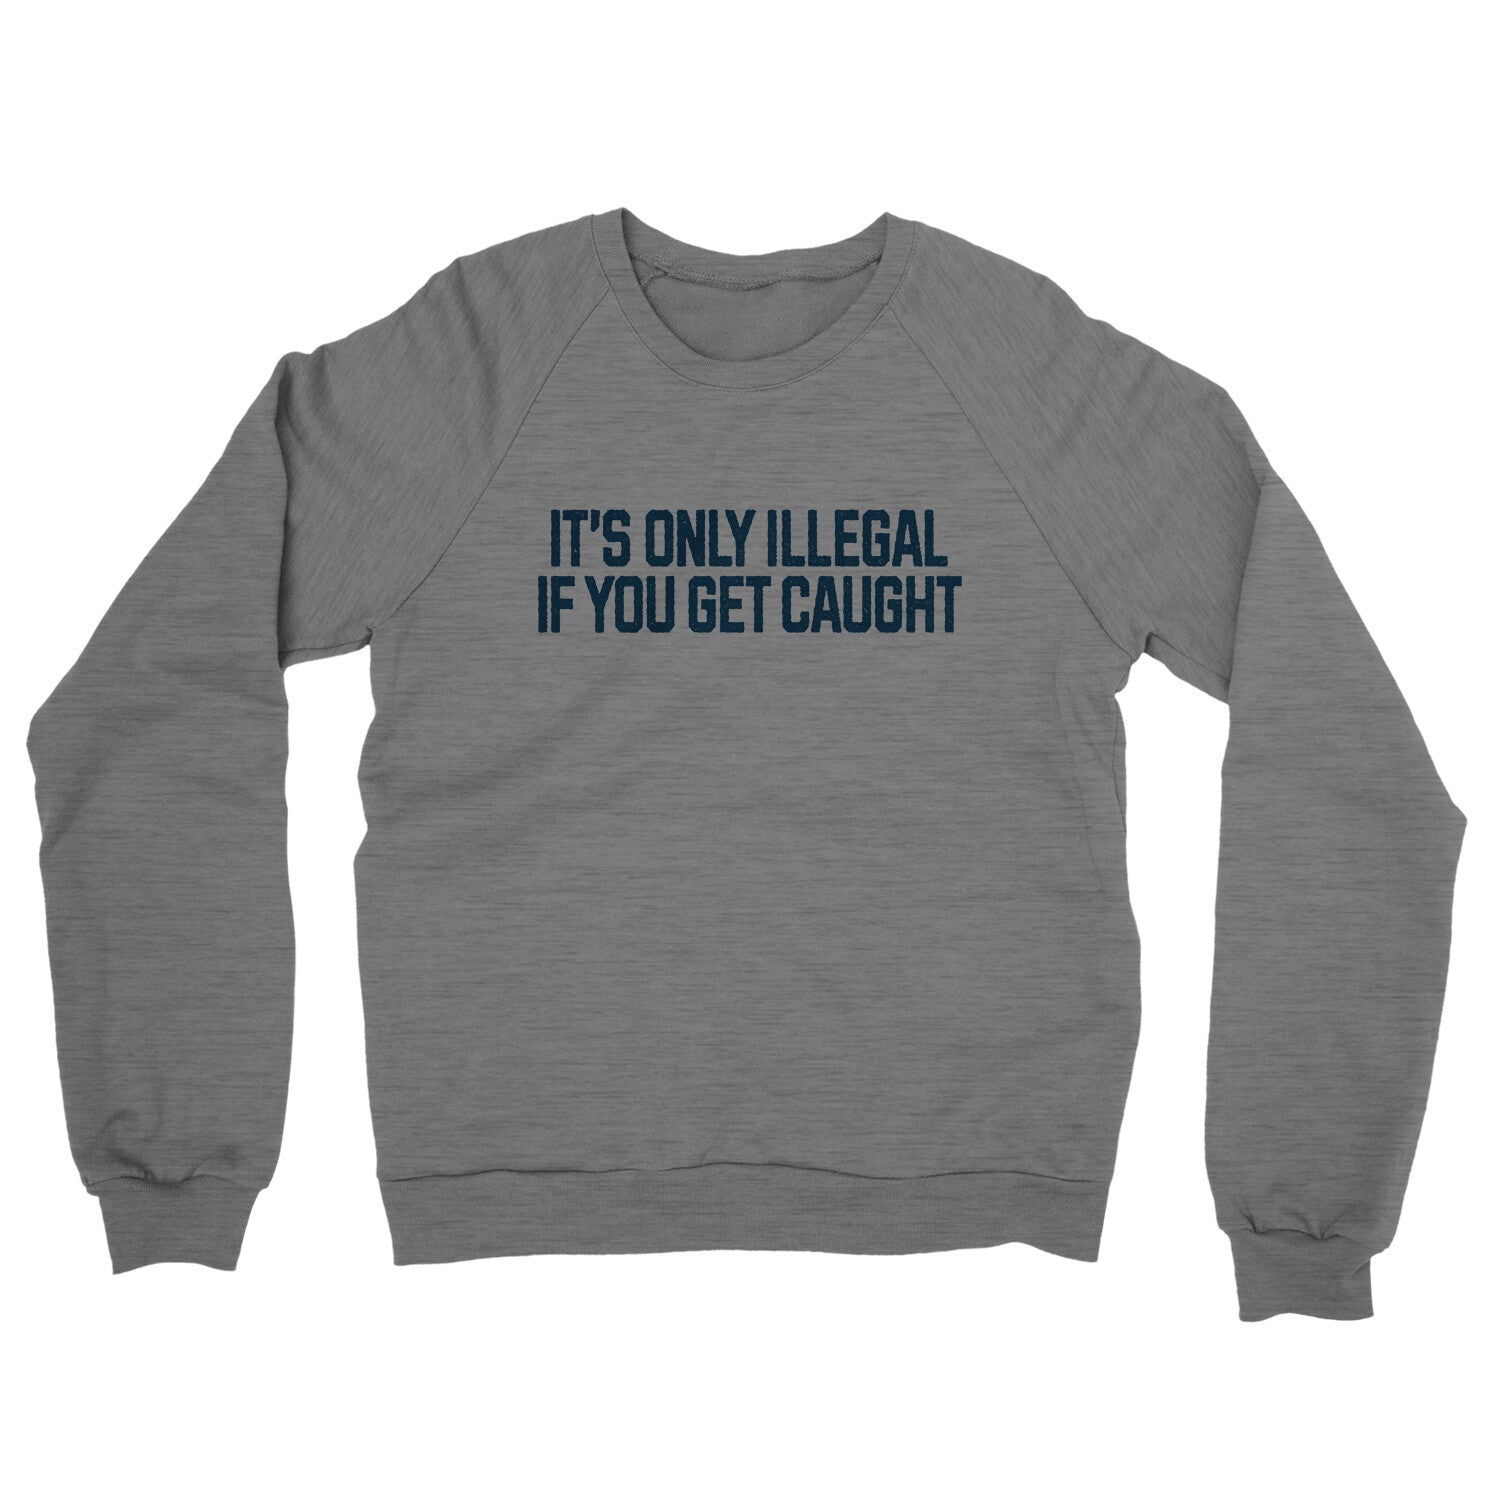 It’s Only Illegal If You Get Caught in Graphite Heather Color